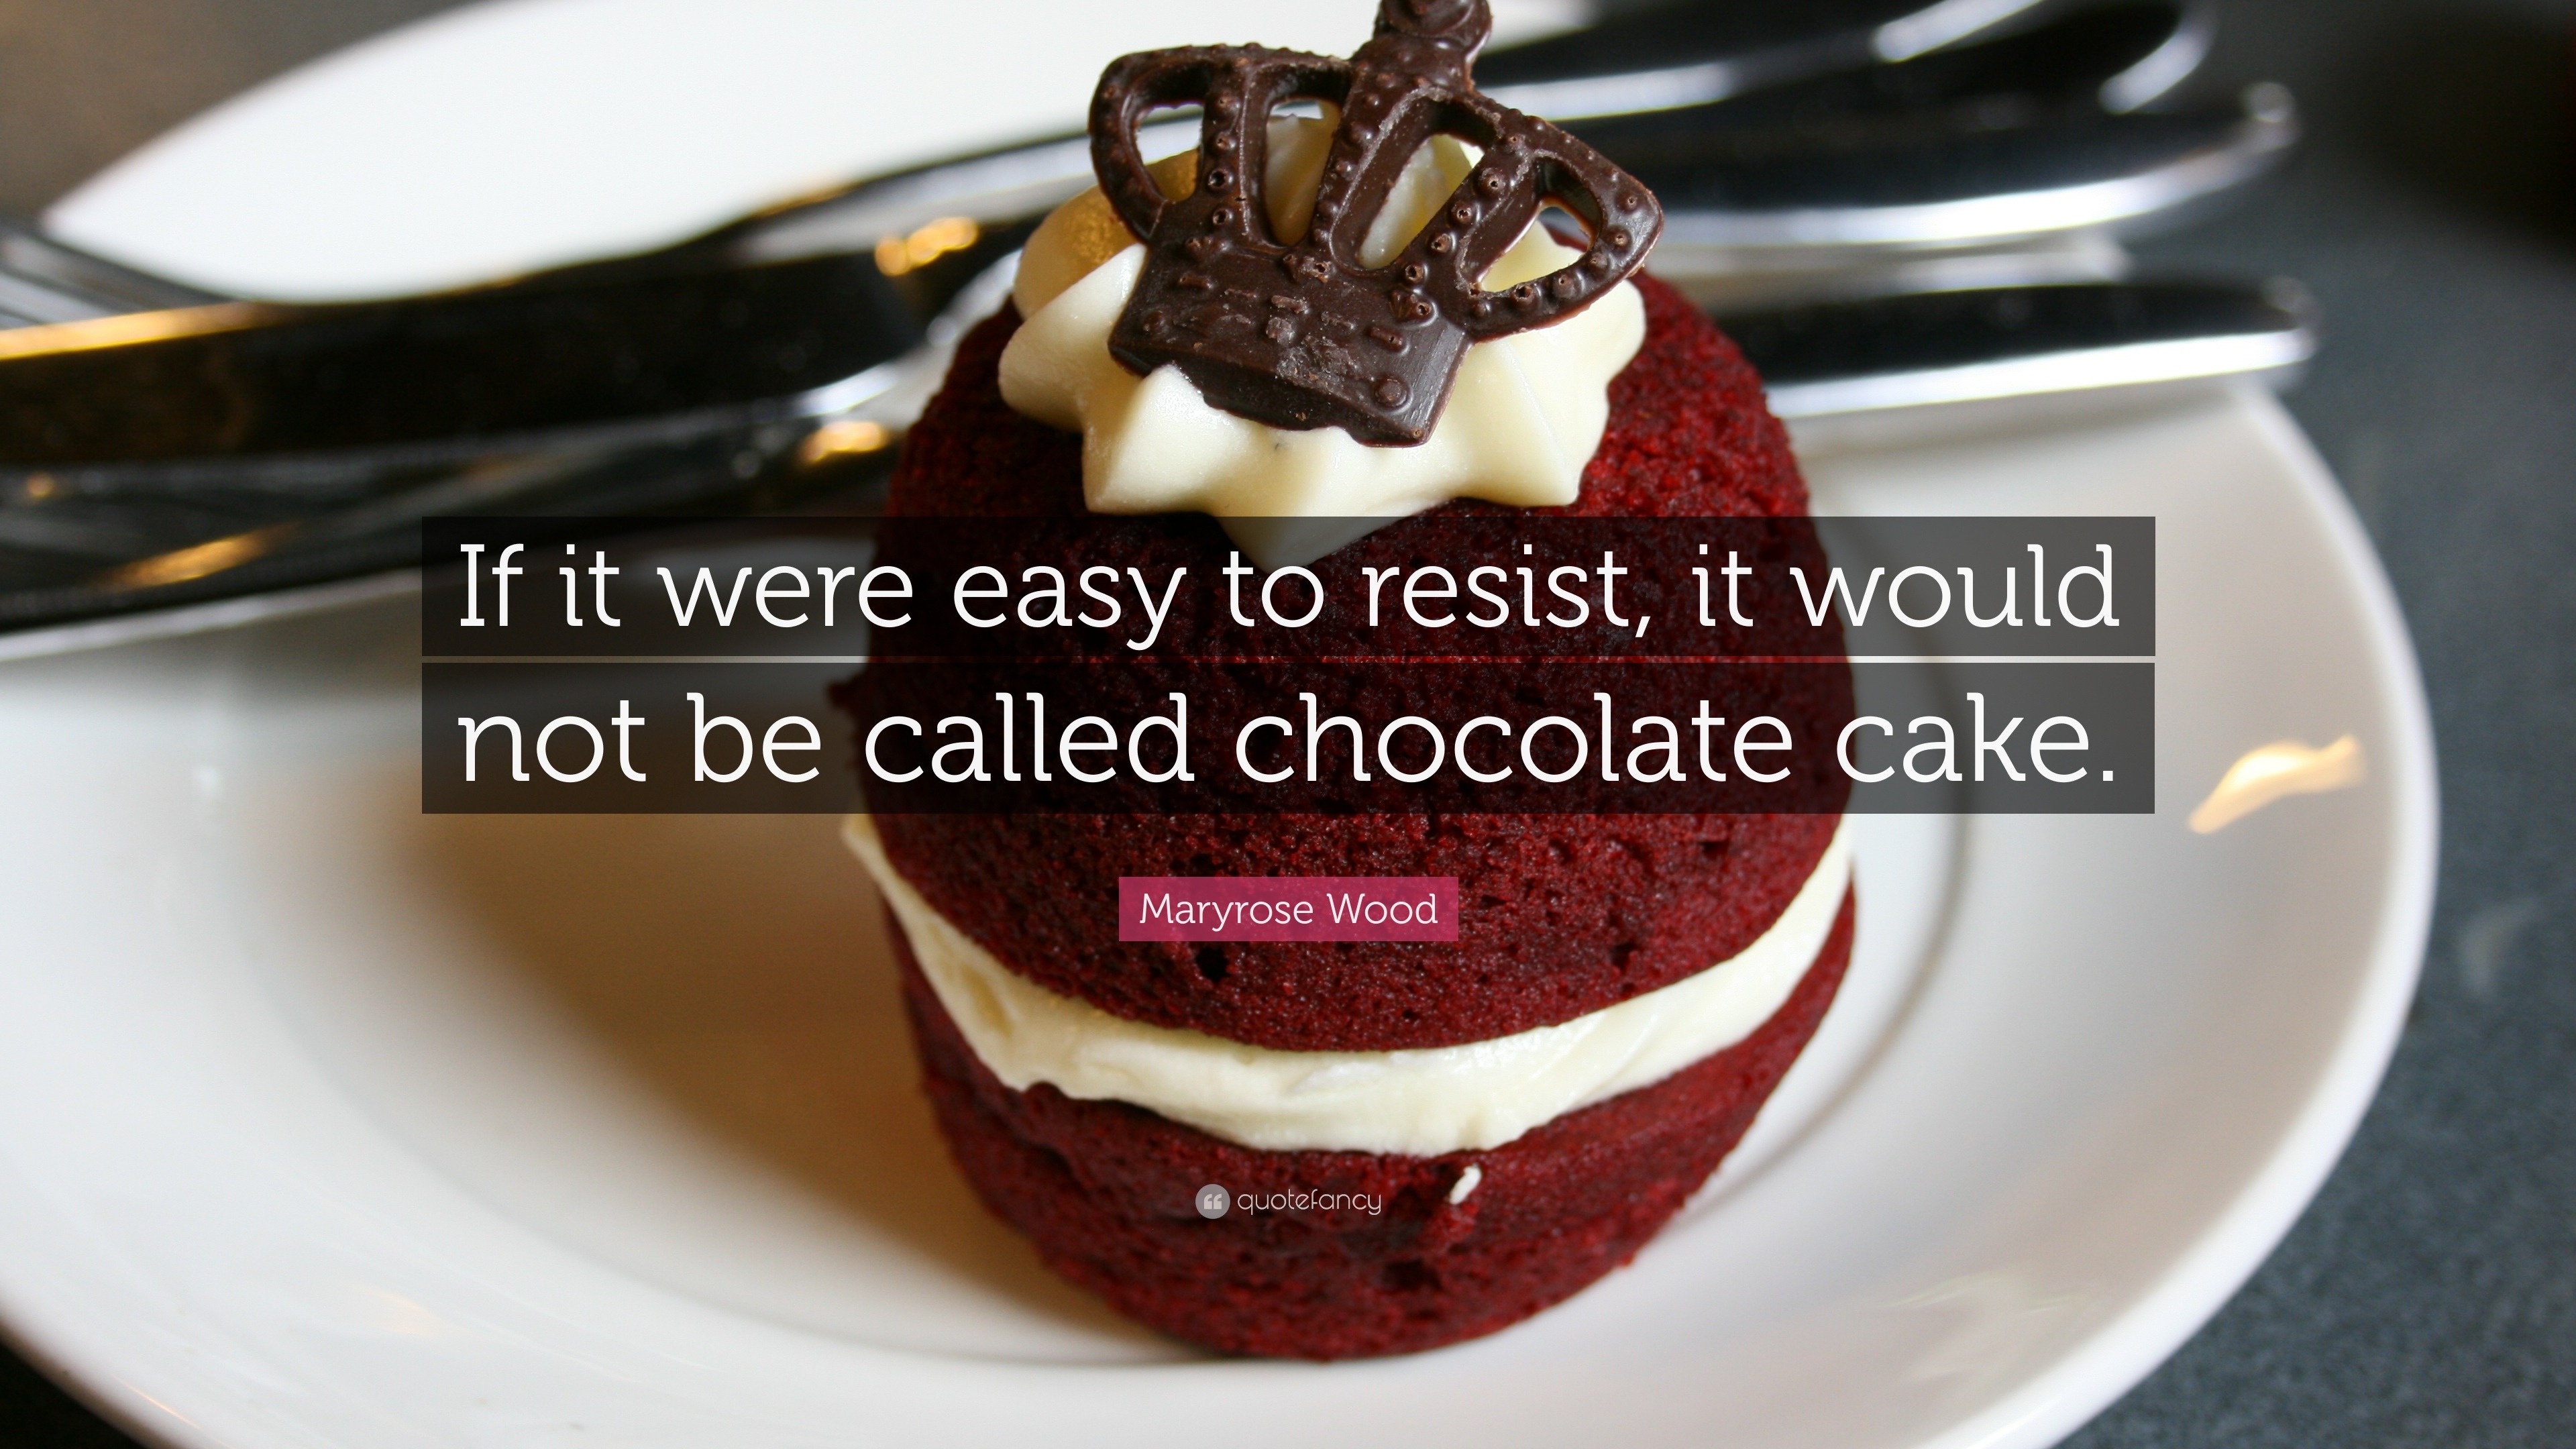 National Chocolate Day Quotes “If it were easy to resist it would not